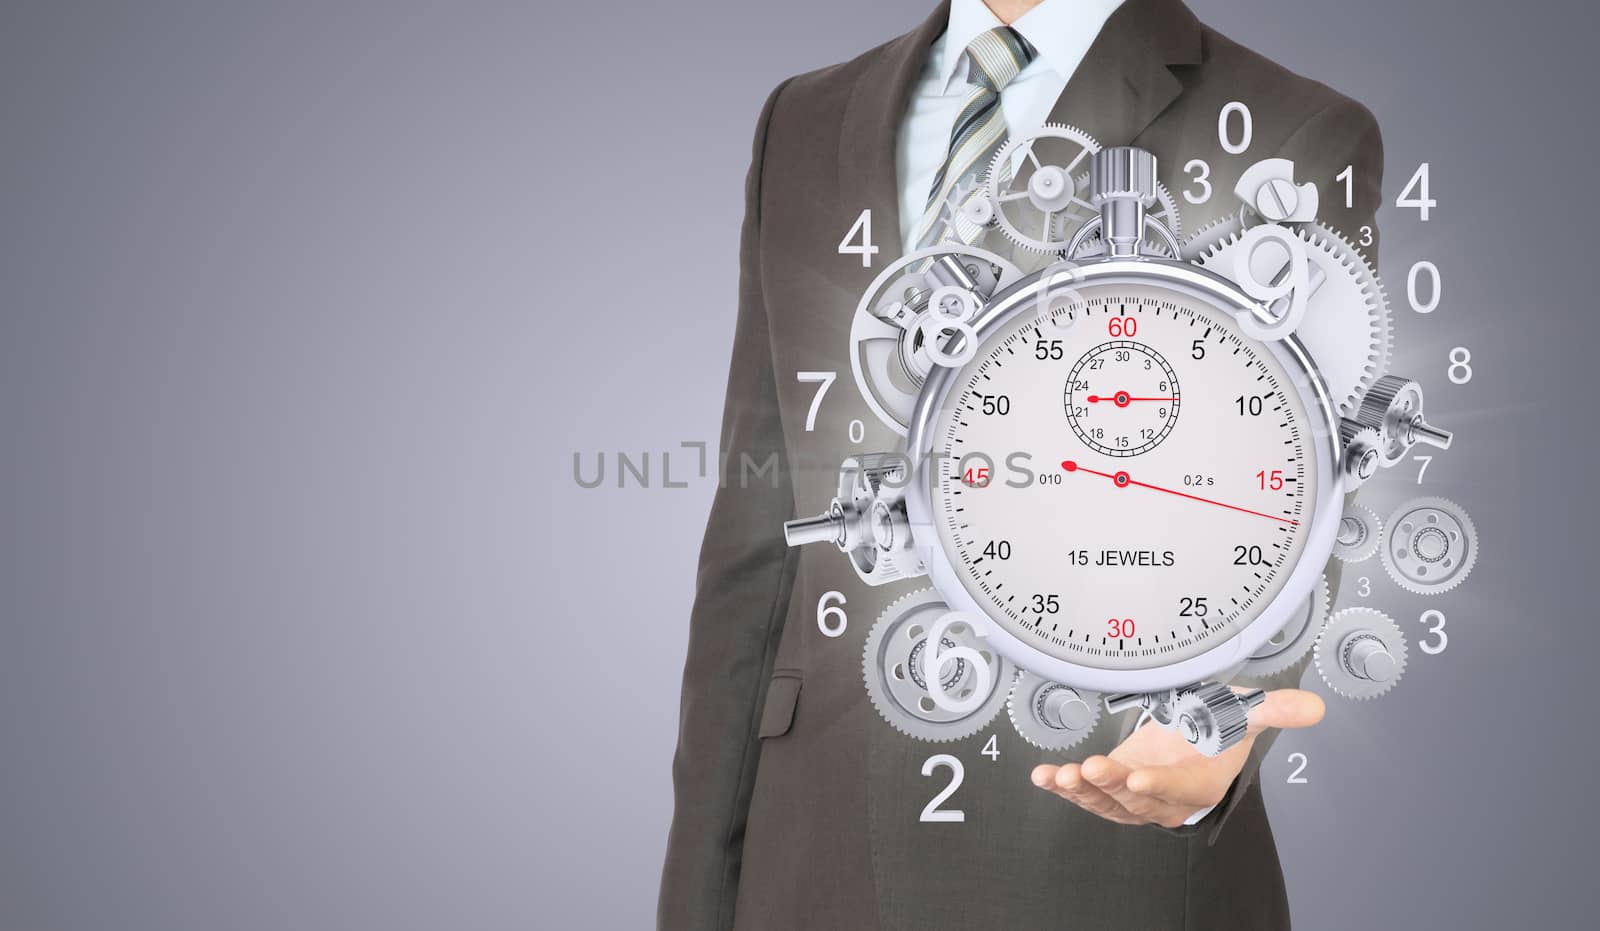 Businessman hold stopwatch with figures and gears. Gray background